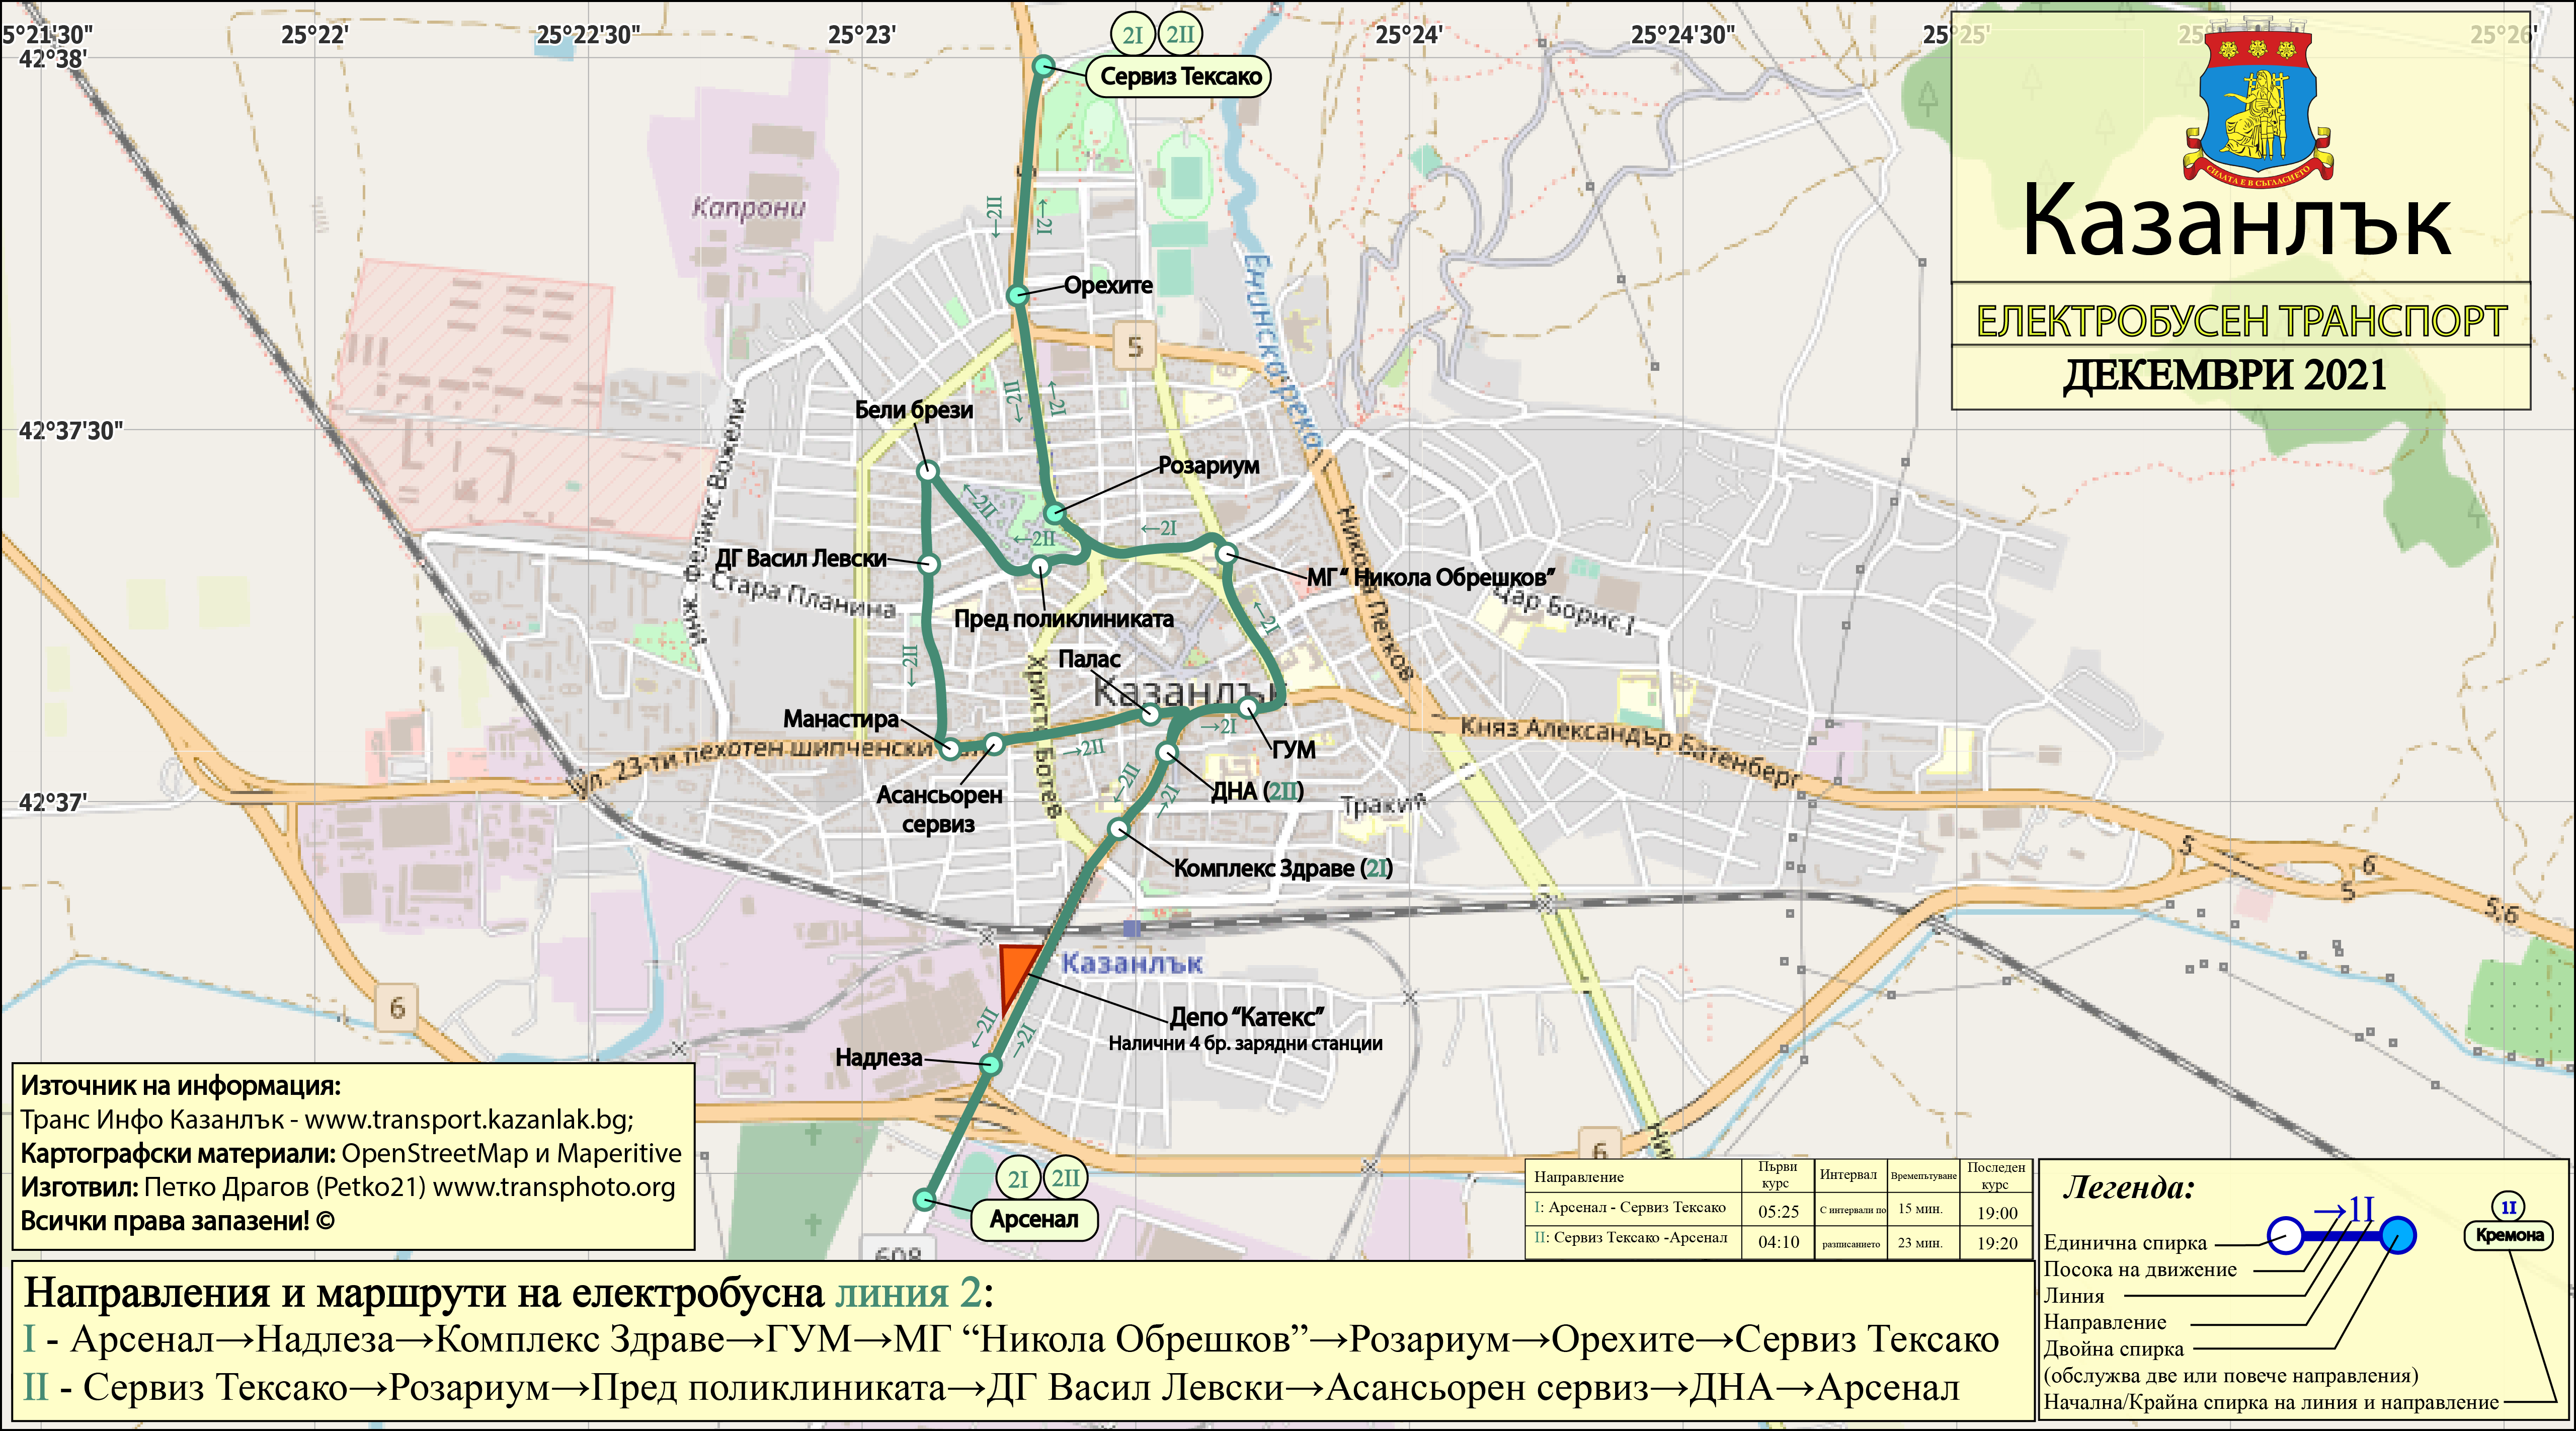 Kazanlak — Map and schemes of electric bus routes; Maps made with OpenStreetMap